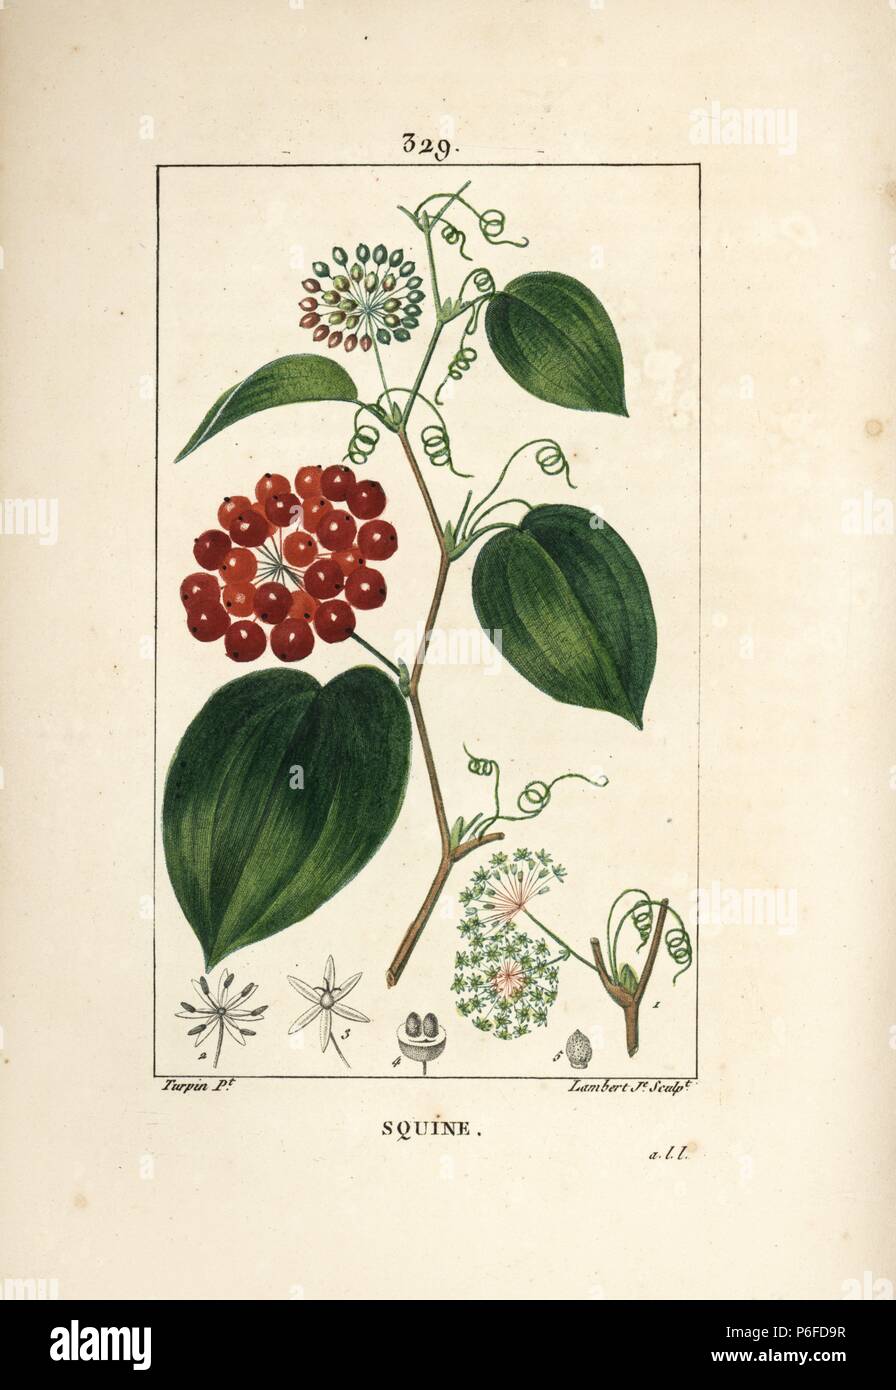 Chinese smilax, Smilax china, with flower, tendril, leaf, and fruit. Handcoloured stipple copperplate engraving by Lambert Junior from a drawing by Pierre Jean-Francois Turpin from Chaumeton, Poiret and Chamberet's 'La Flore Medicale,' Paris, Panckoucke, 1830. Turpin (17751840) was one of the three giants of French botanical art of the era alongside Pierre Joseph Redoute and Pancrace Bessa. Stock Photo